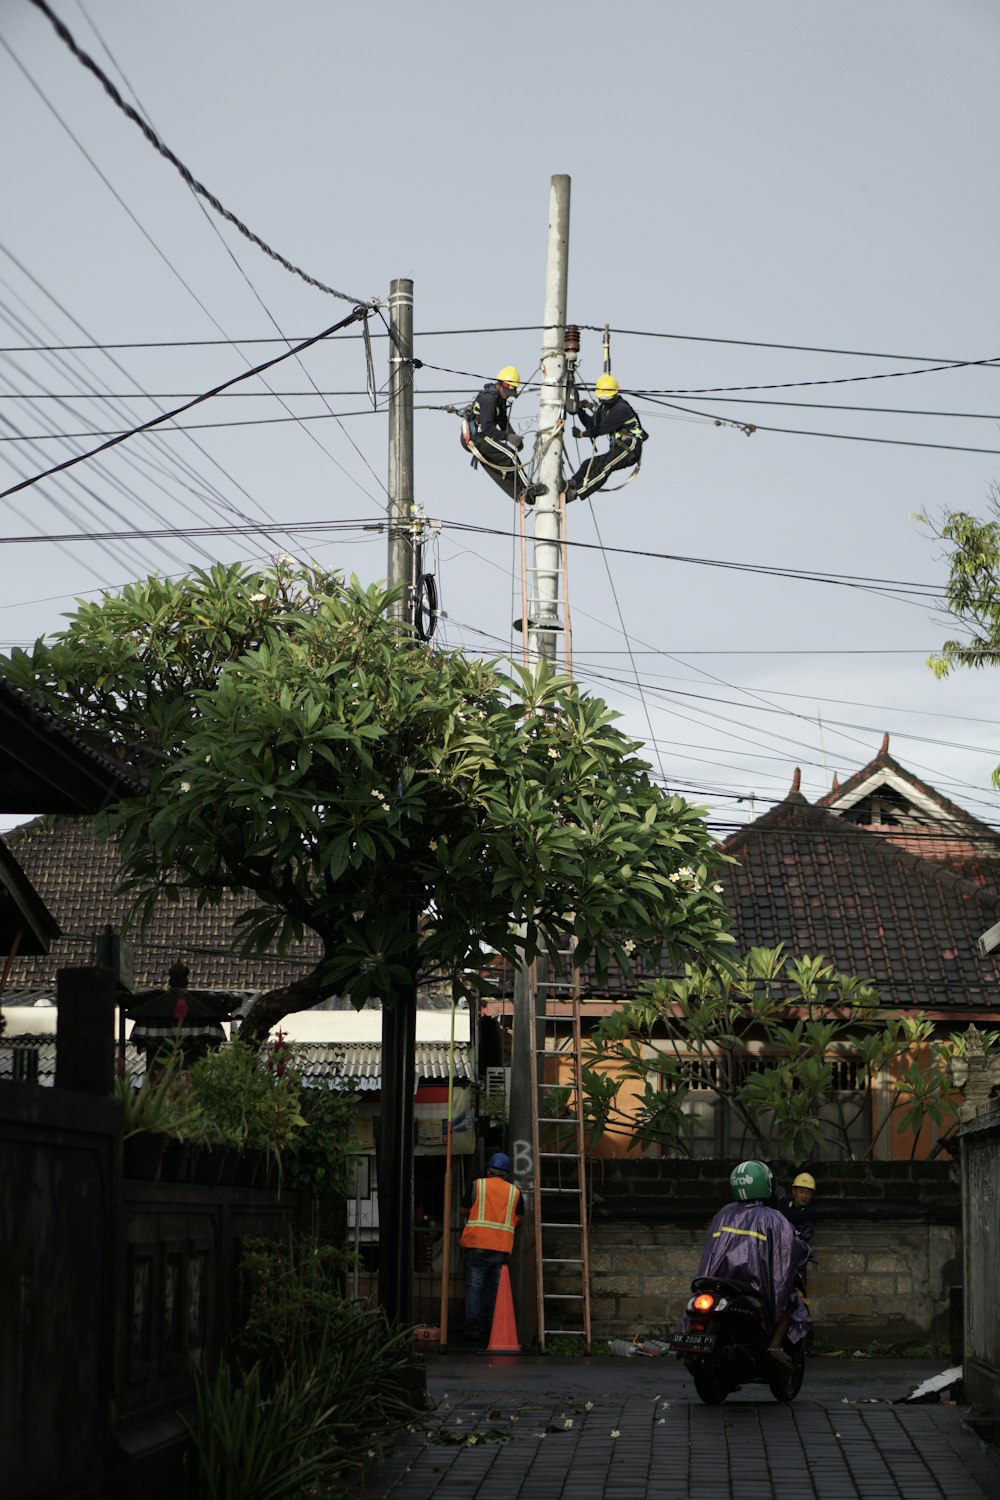 a man riding a motorcycle down a street next to power lines